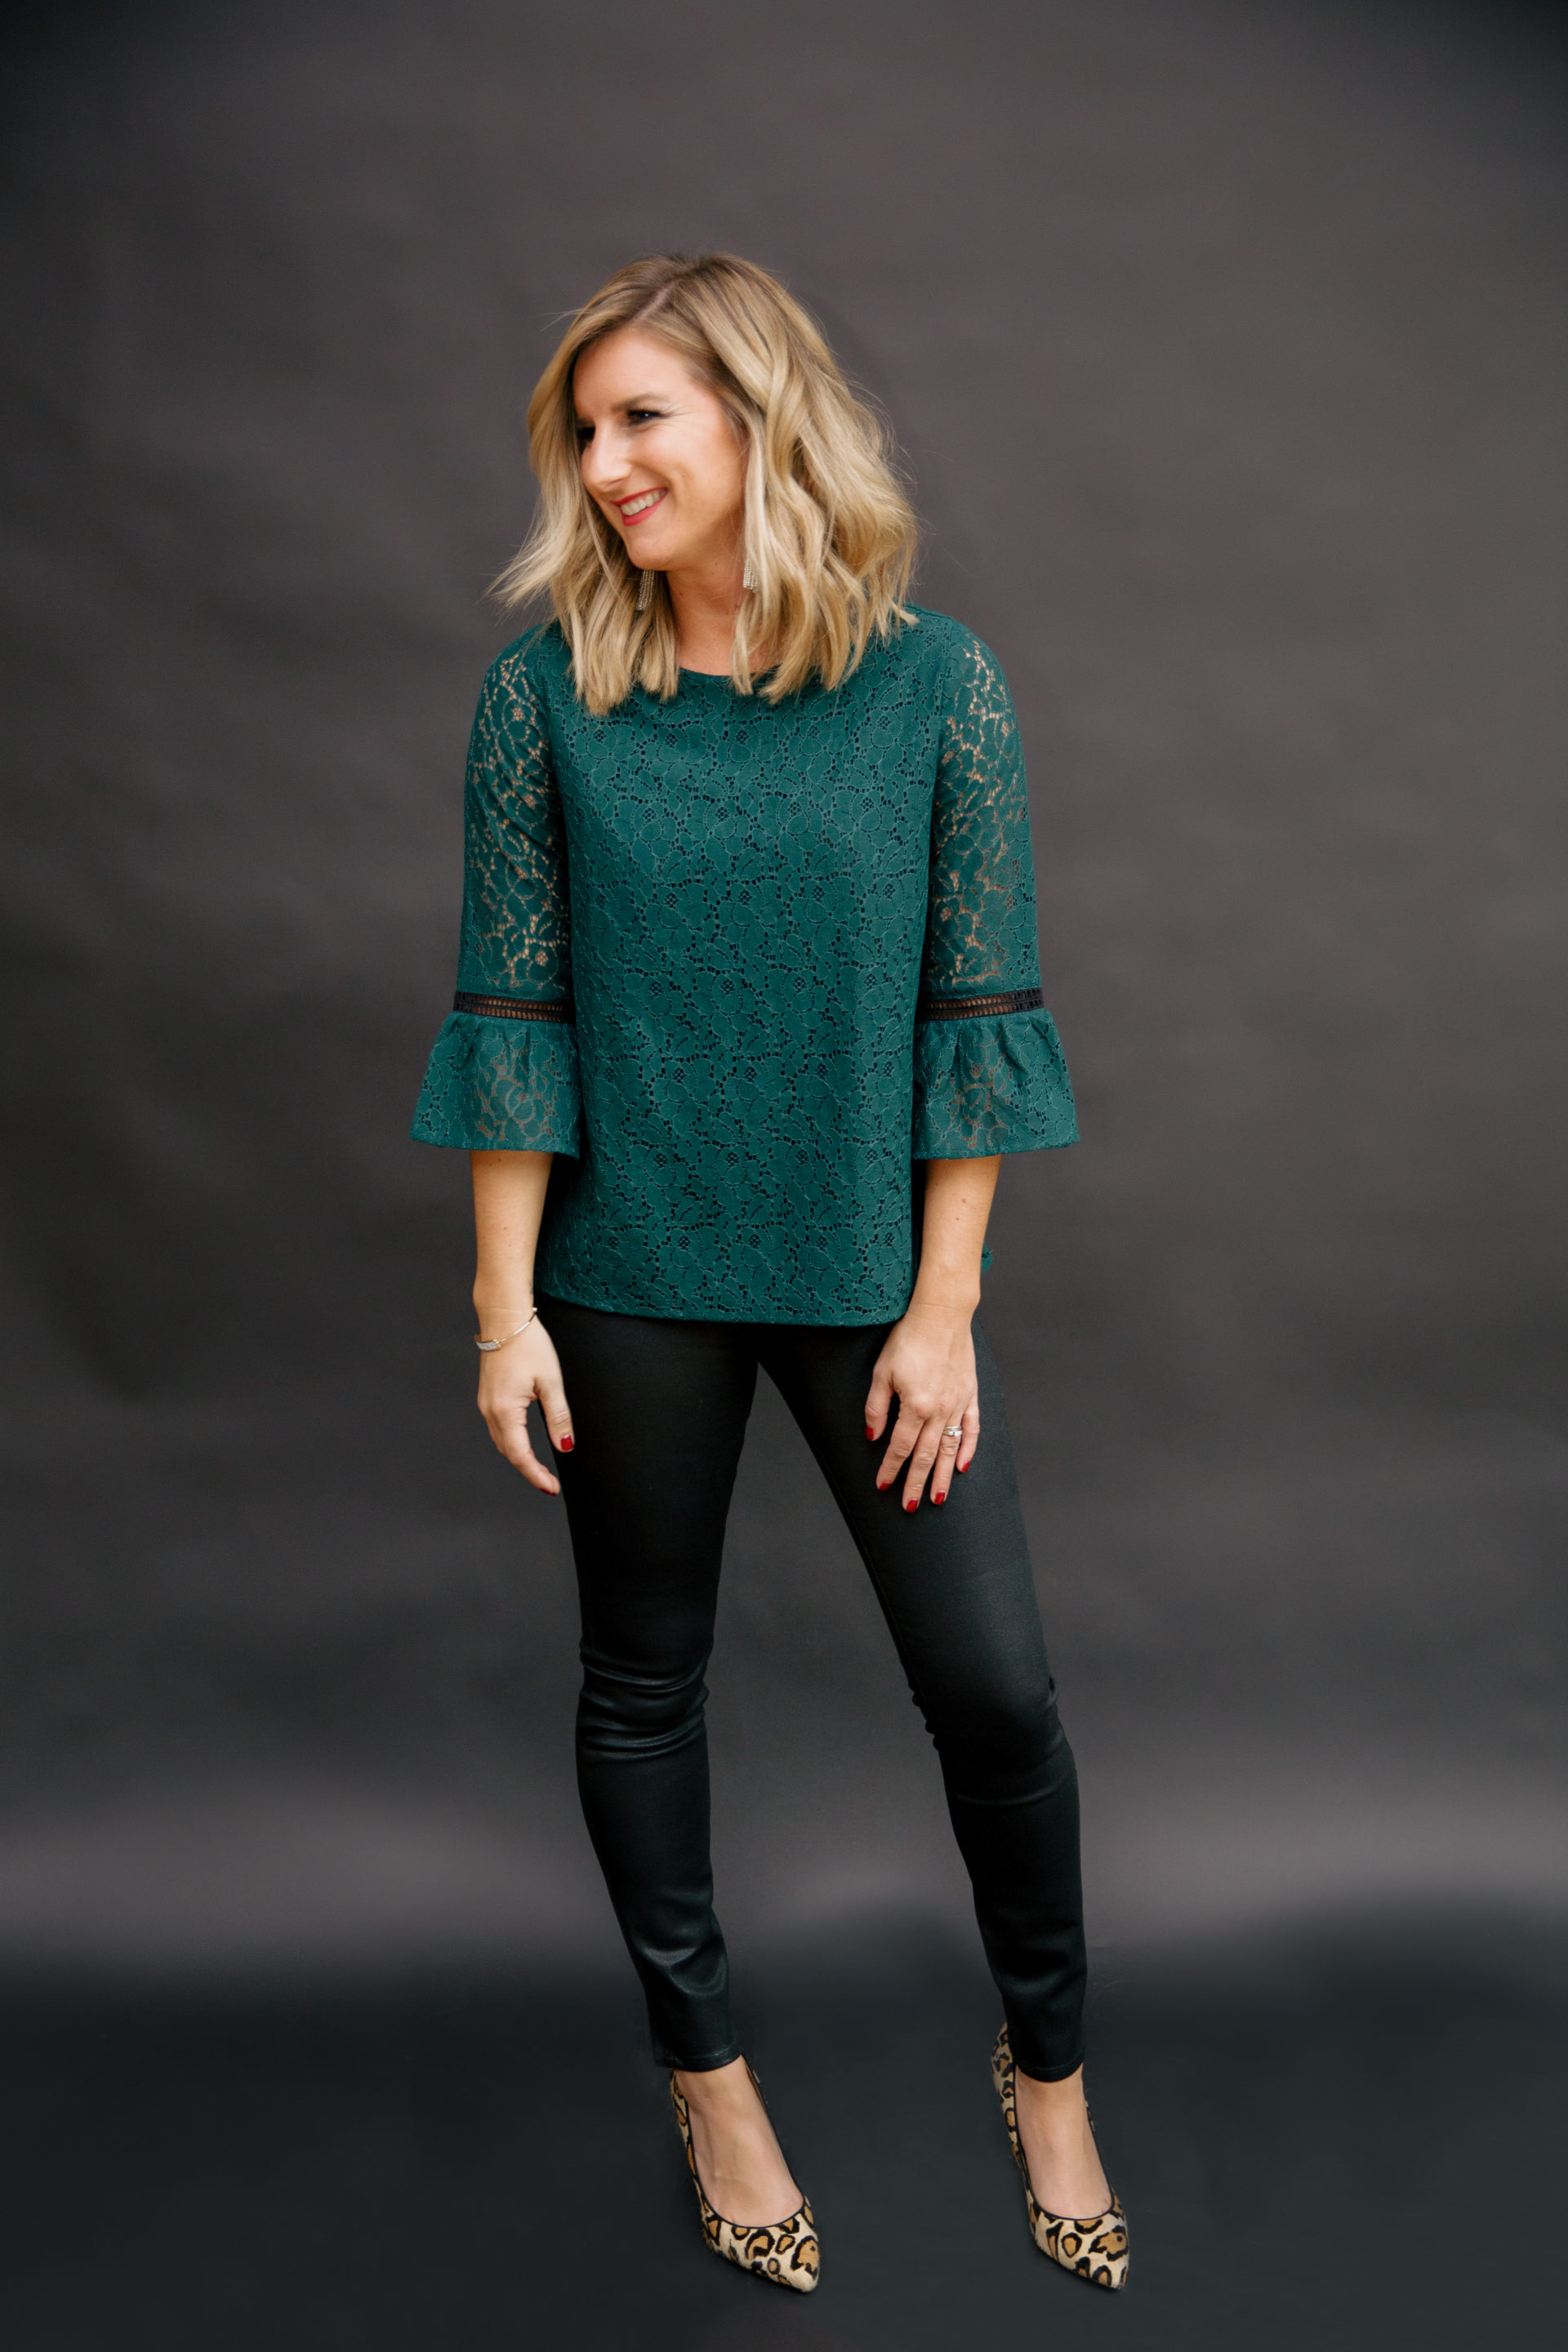 gibson glam holiday outfit ideas - the MALLORY velvet wrap top in black -  Pinteresting Plans